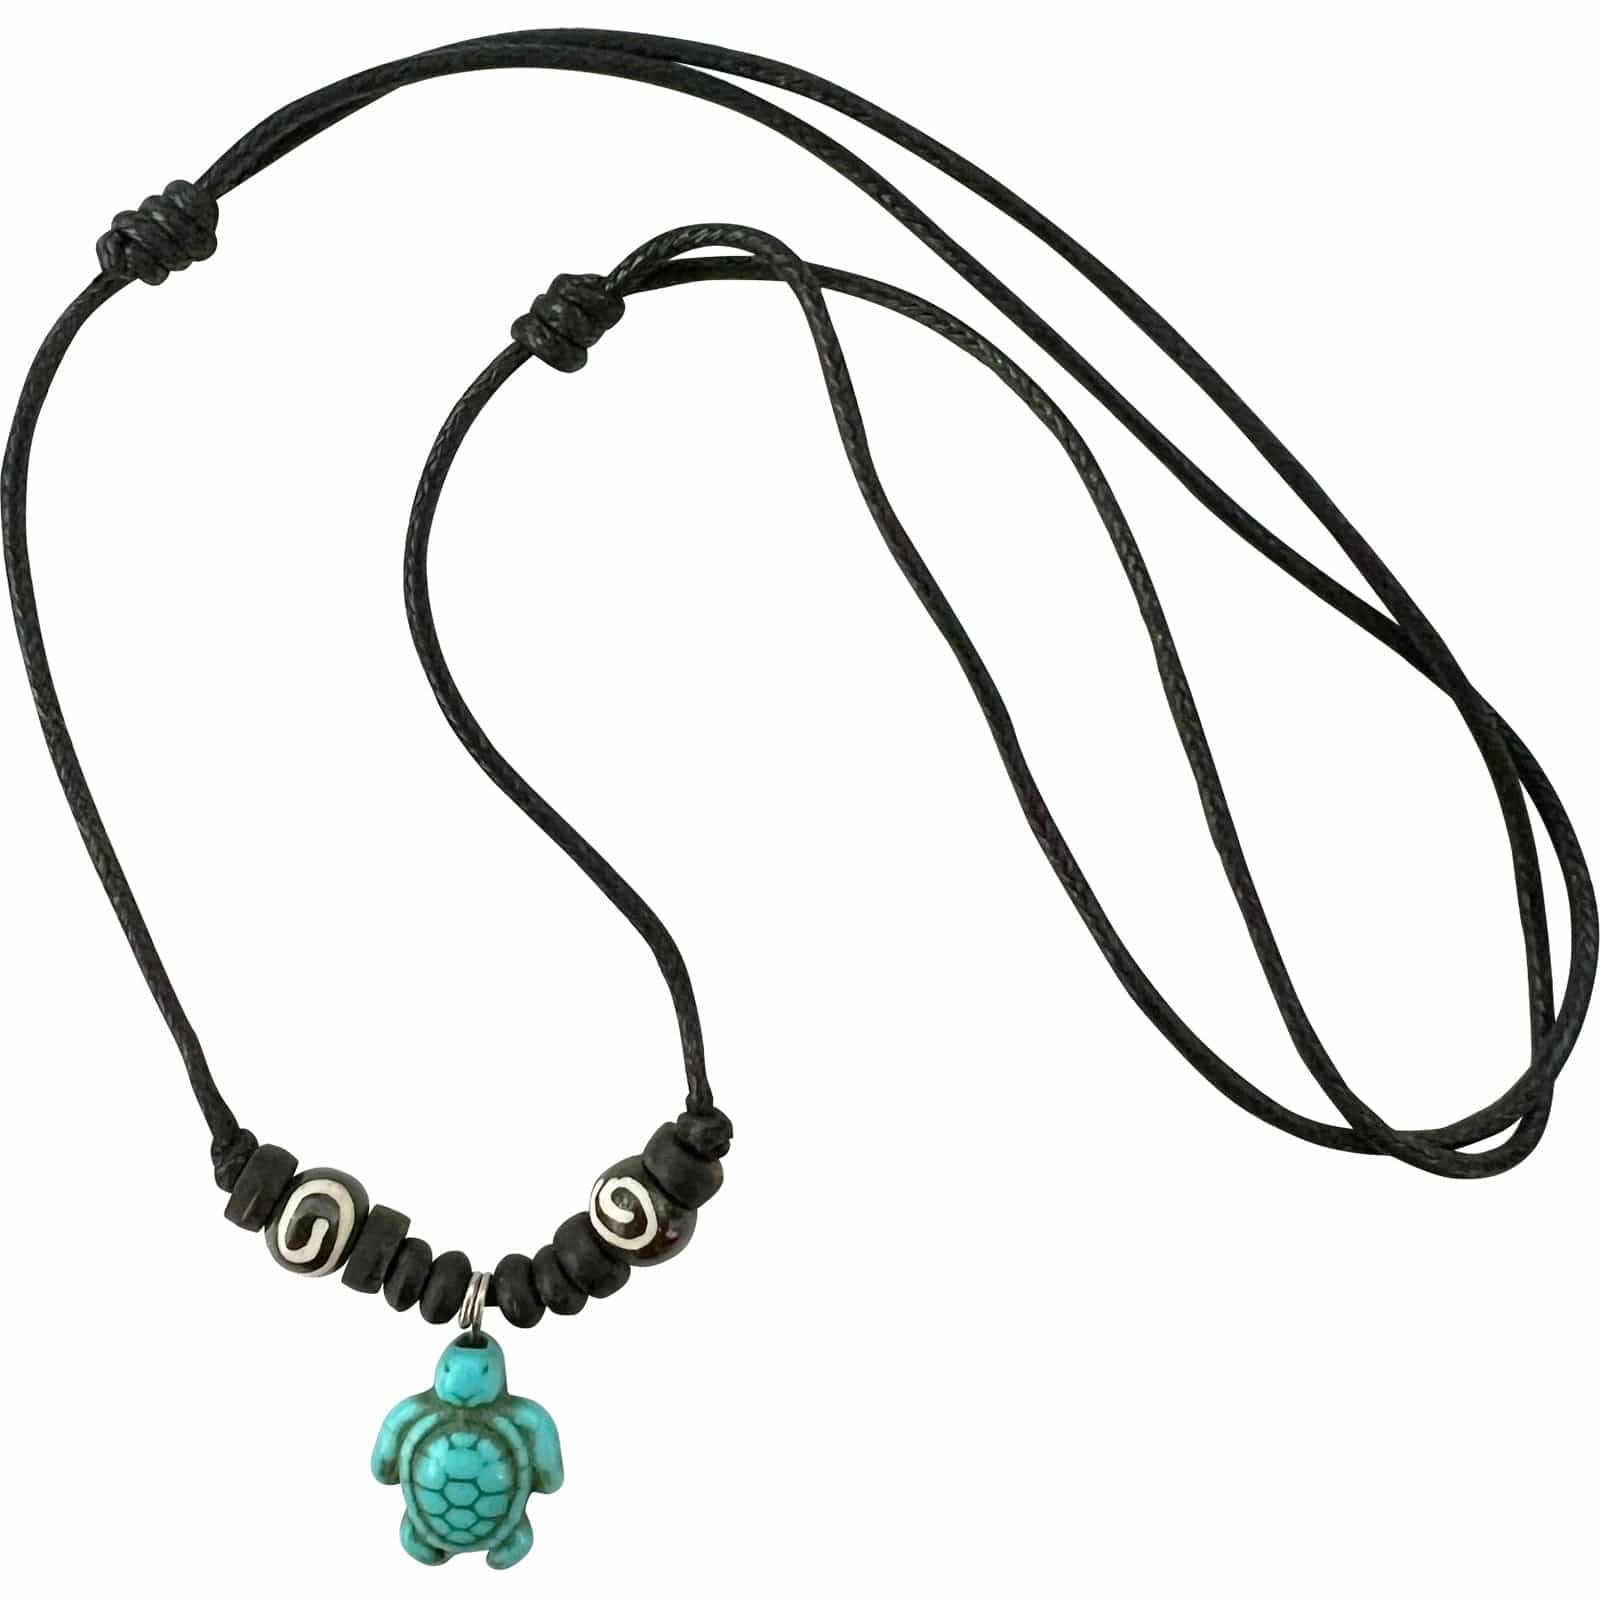 Turquoise Turtle Pendant Beaded Black Cord Chain Necklace Mens Womens Jewellery